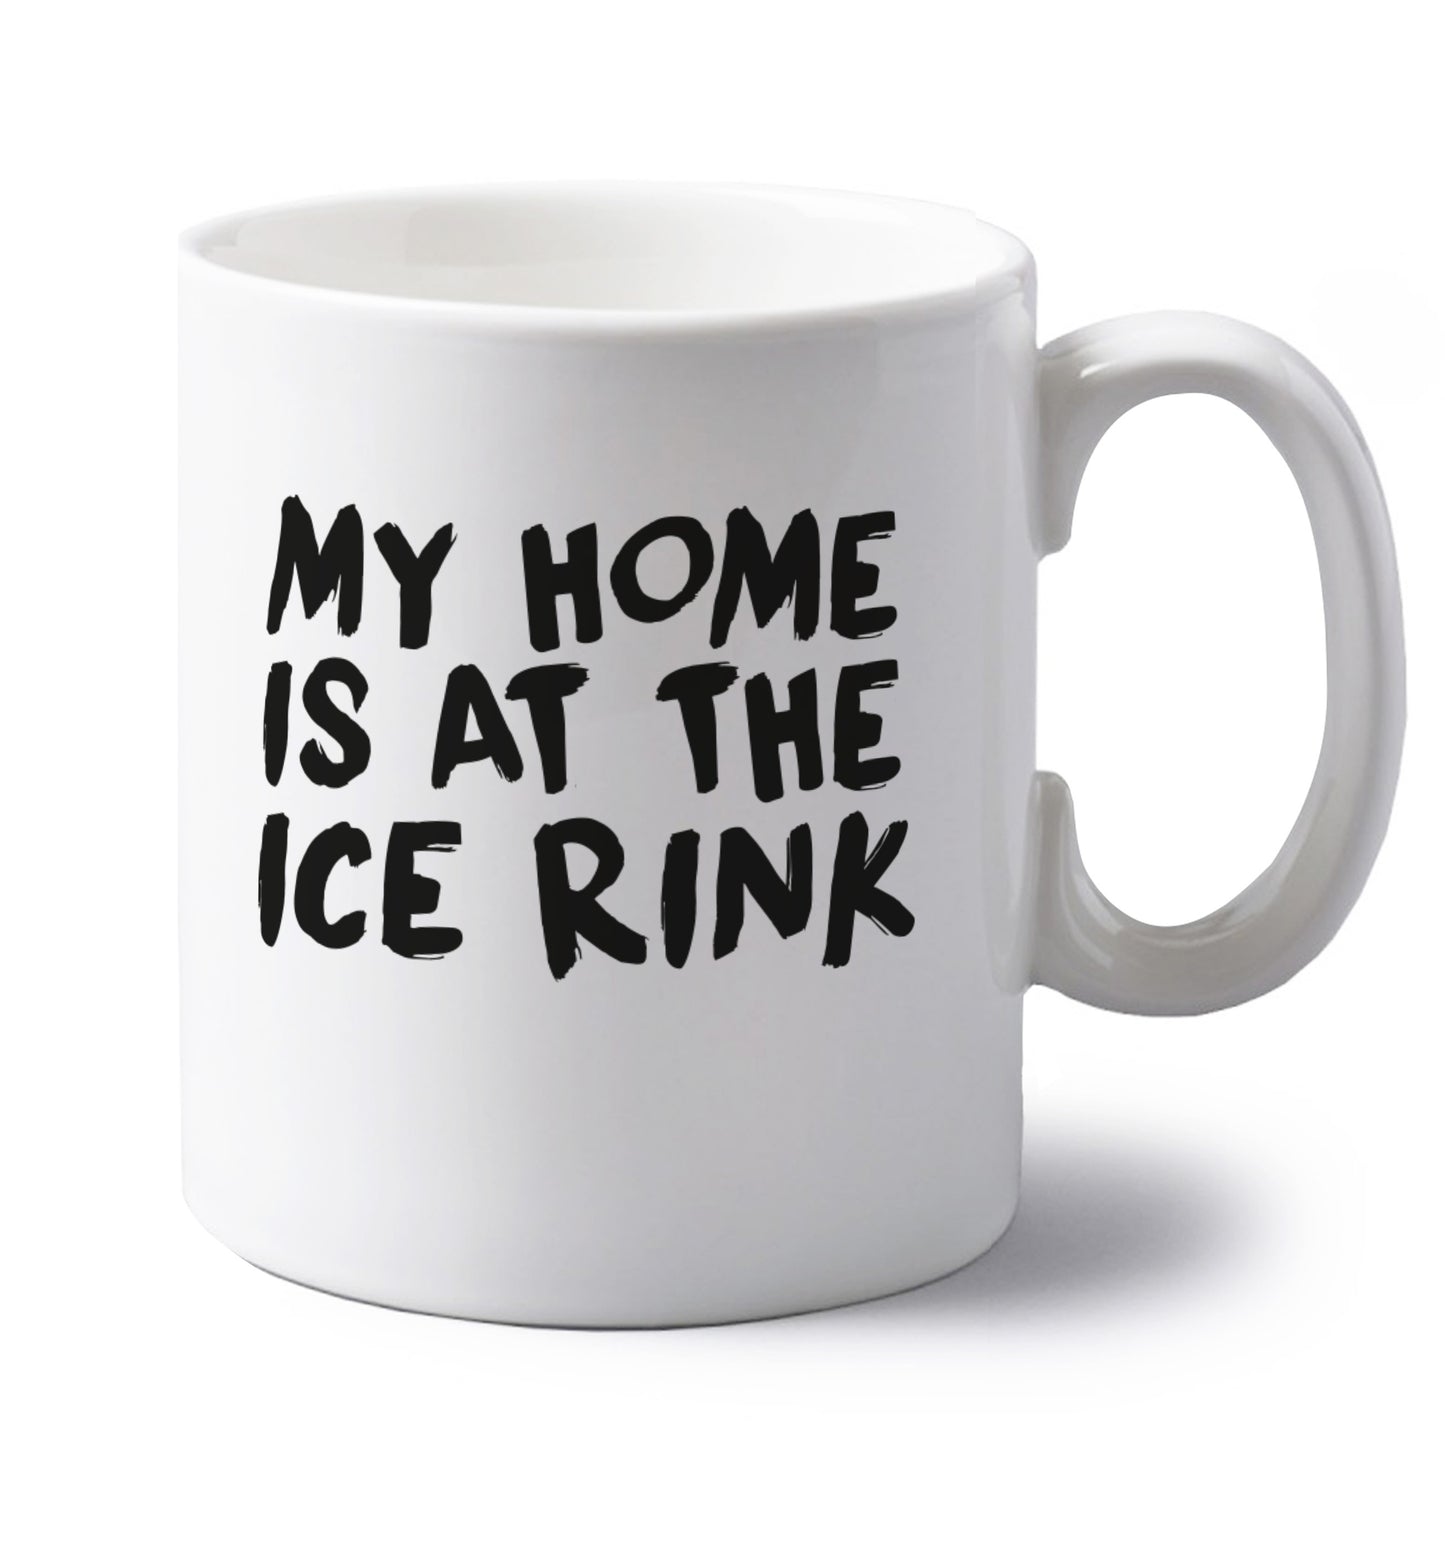 My home is at the ice rink left handed white ceramic mug 